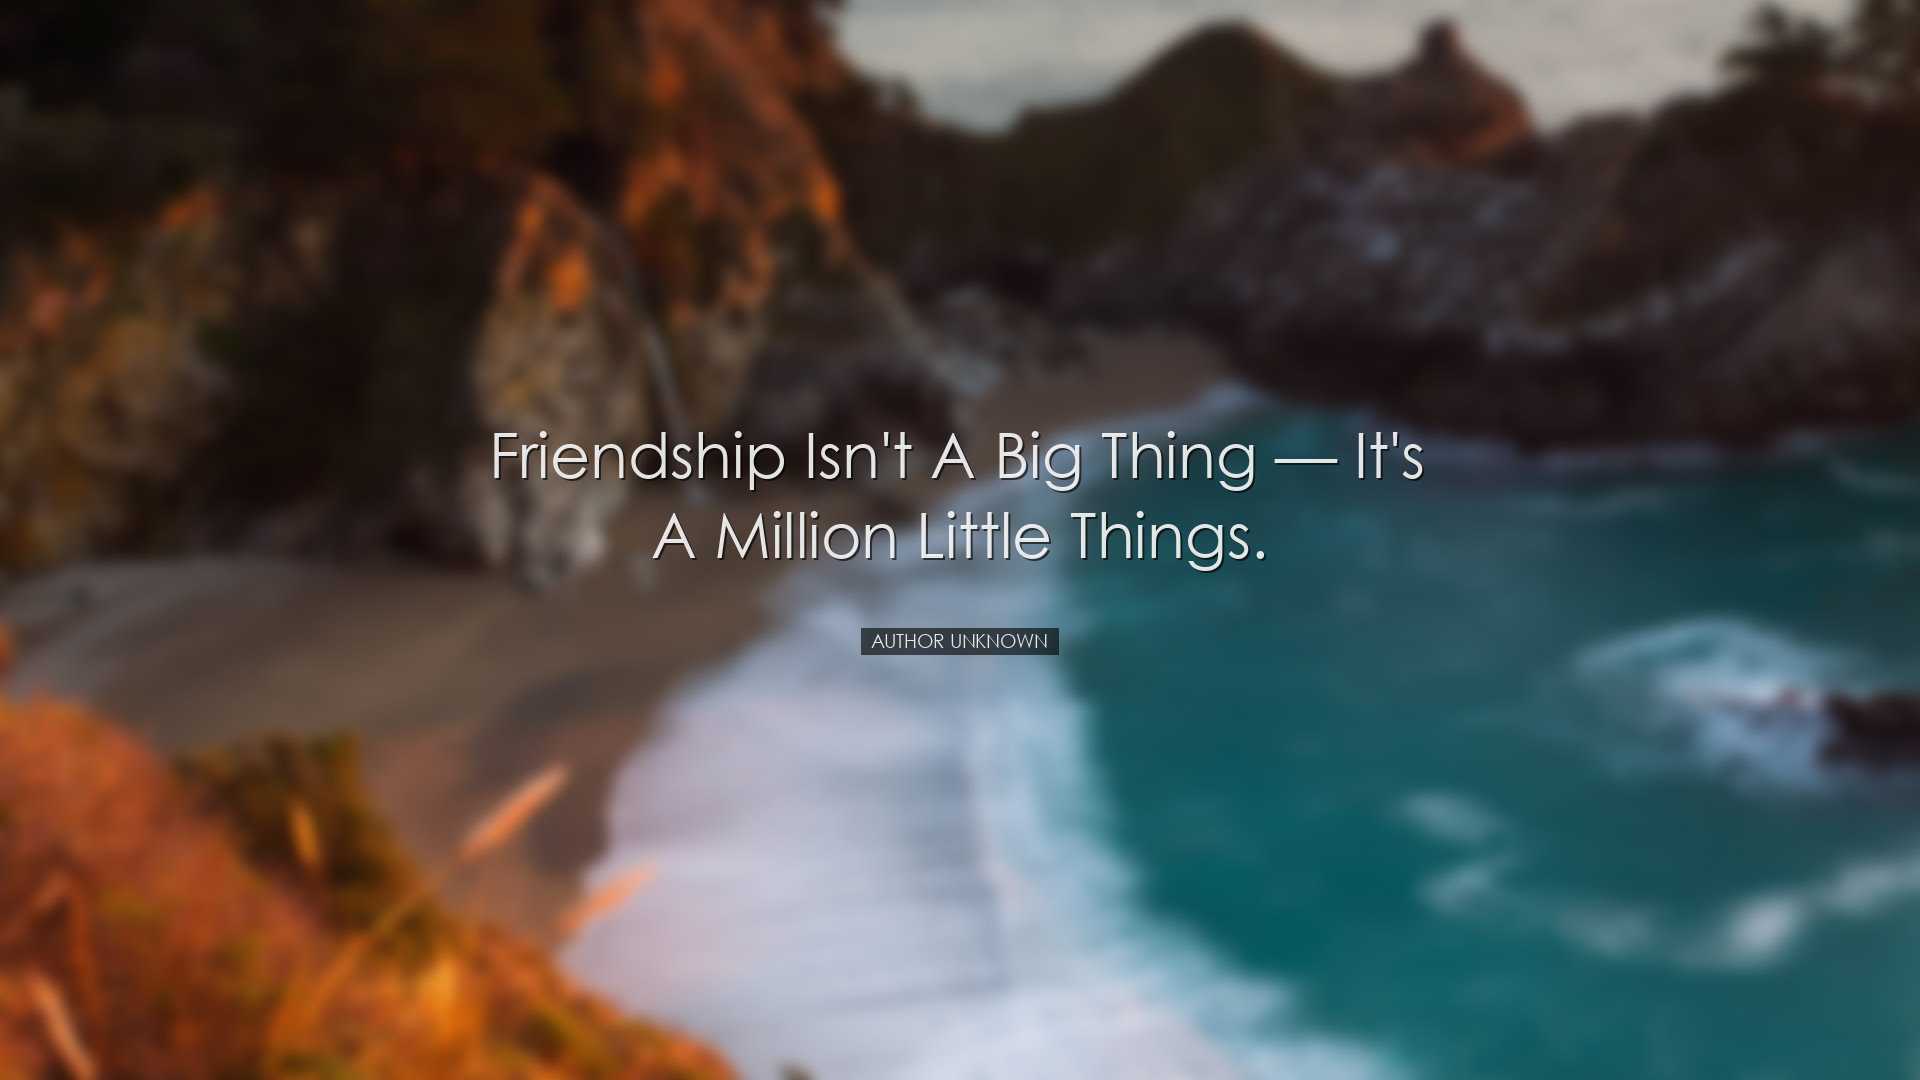 Friendship isn't a big thing — it's a million little things.